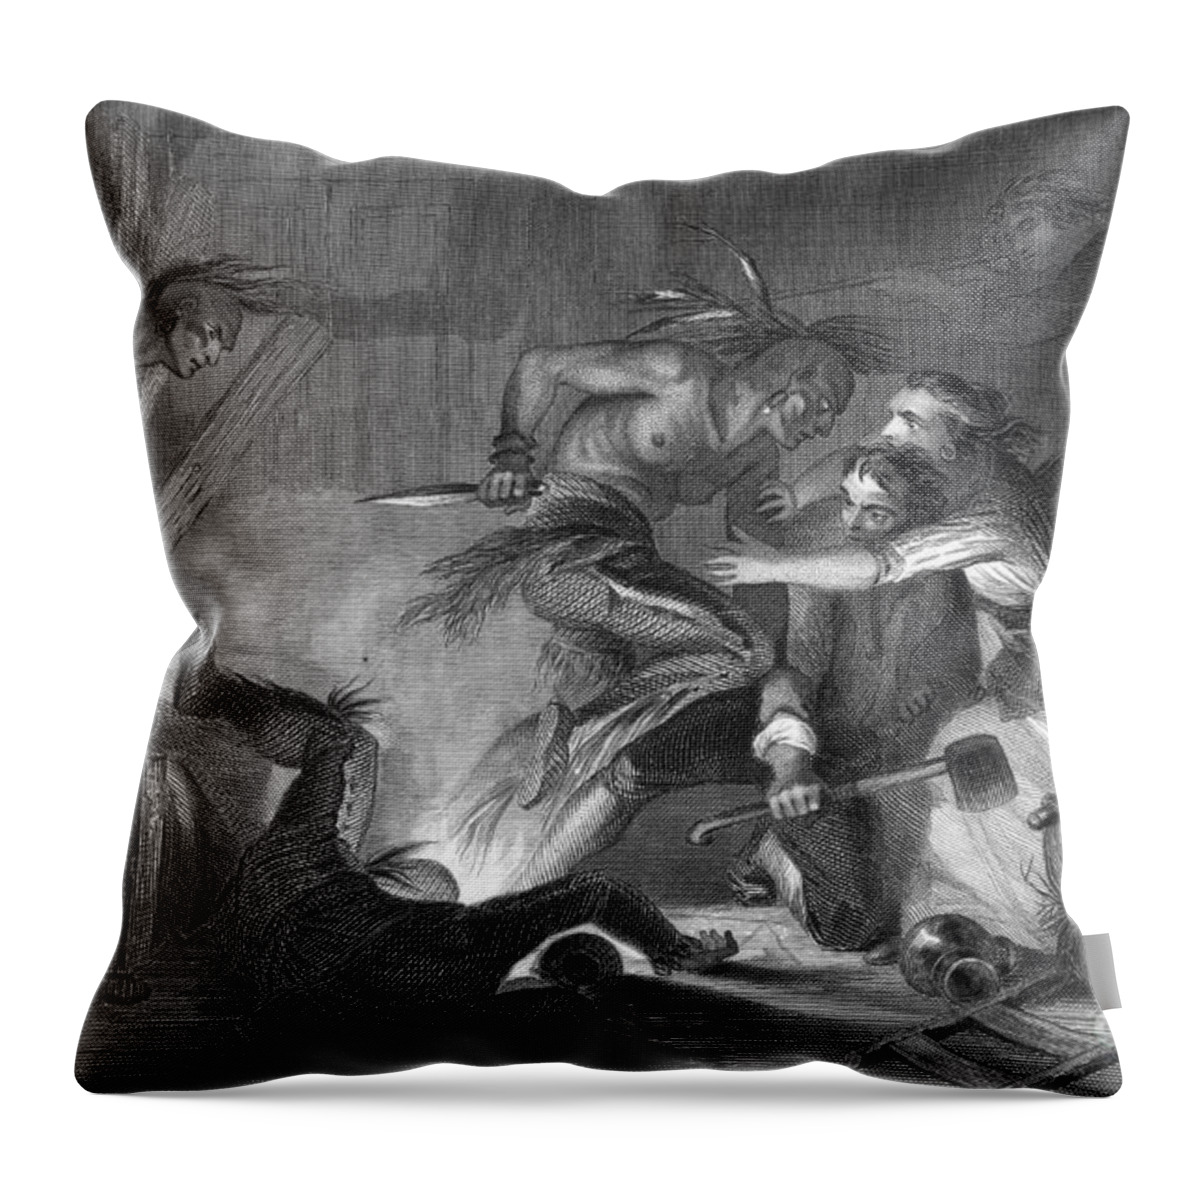 History Throw Pillow featuring the photograph Battle Of Wyoming, 1778 by Photo Researchers